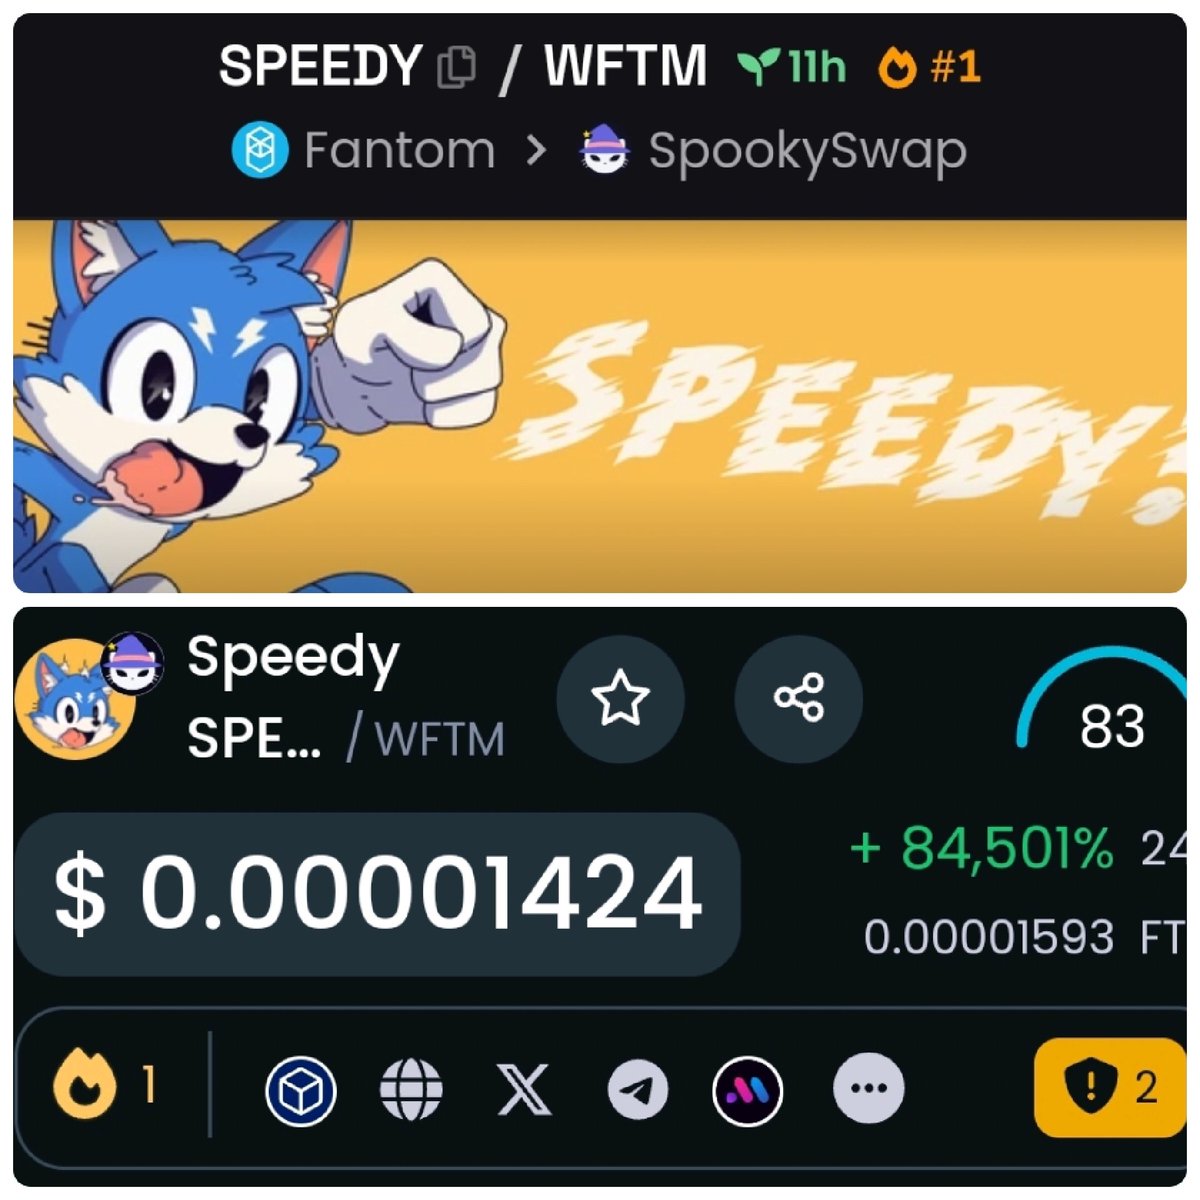 Being the number one trending token on both Dextools and Dexscreener at the same time isn't for just anyone—it's for the fastest dog on-chain. All hail the new meme king, $SPEEDY! 🐕👑